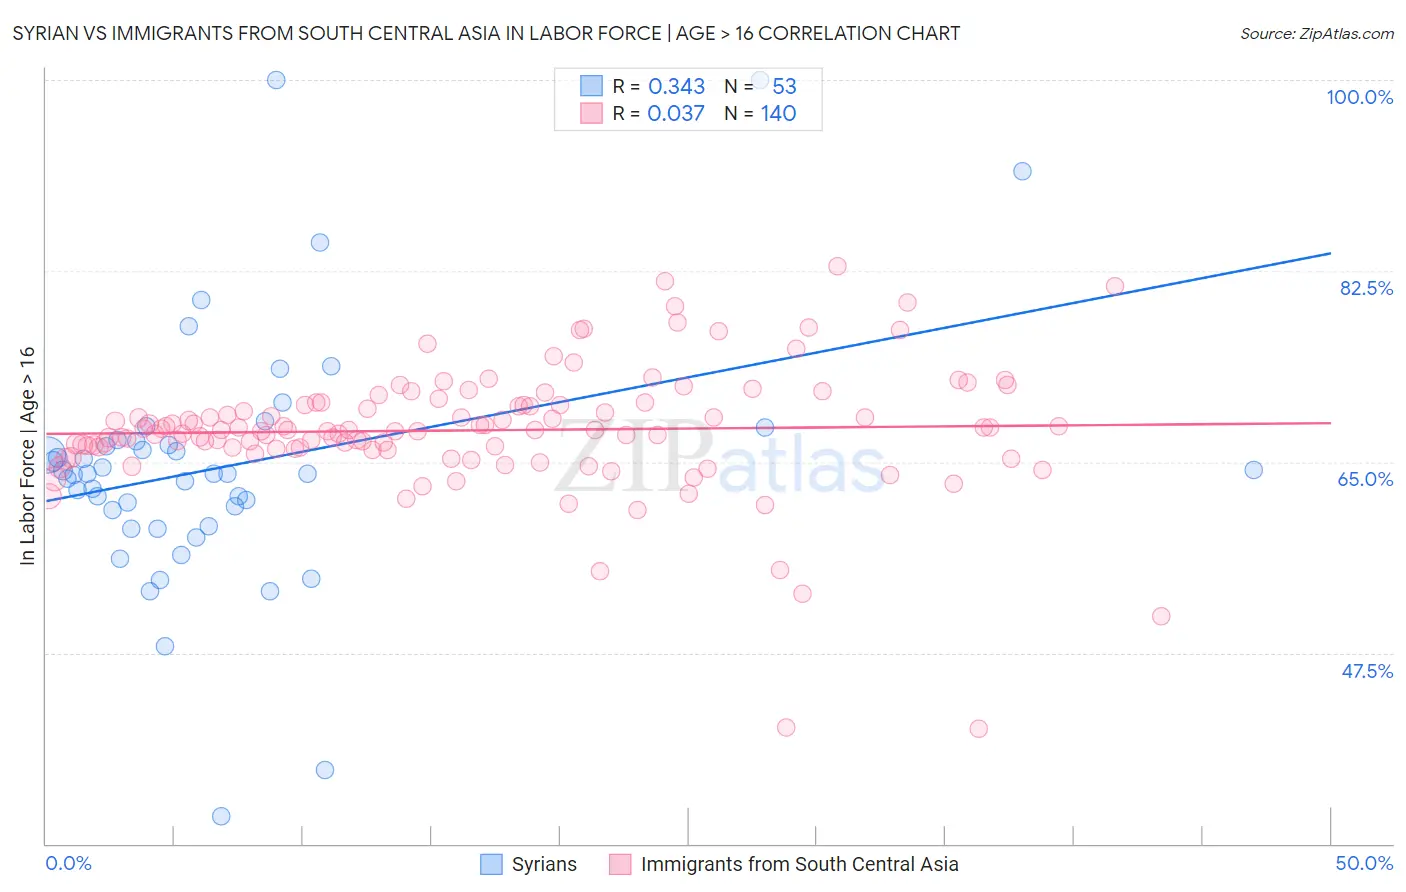 Syrian vs Immigrants from South Central Asia In Labor Force | Age > 16